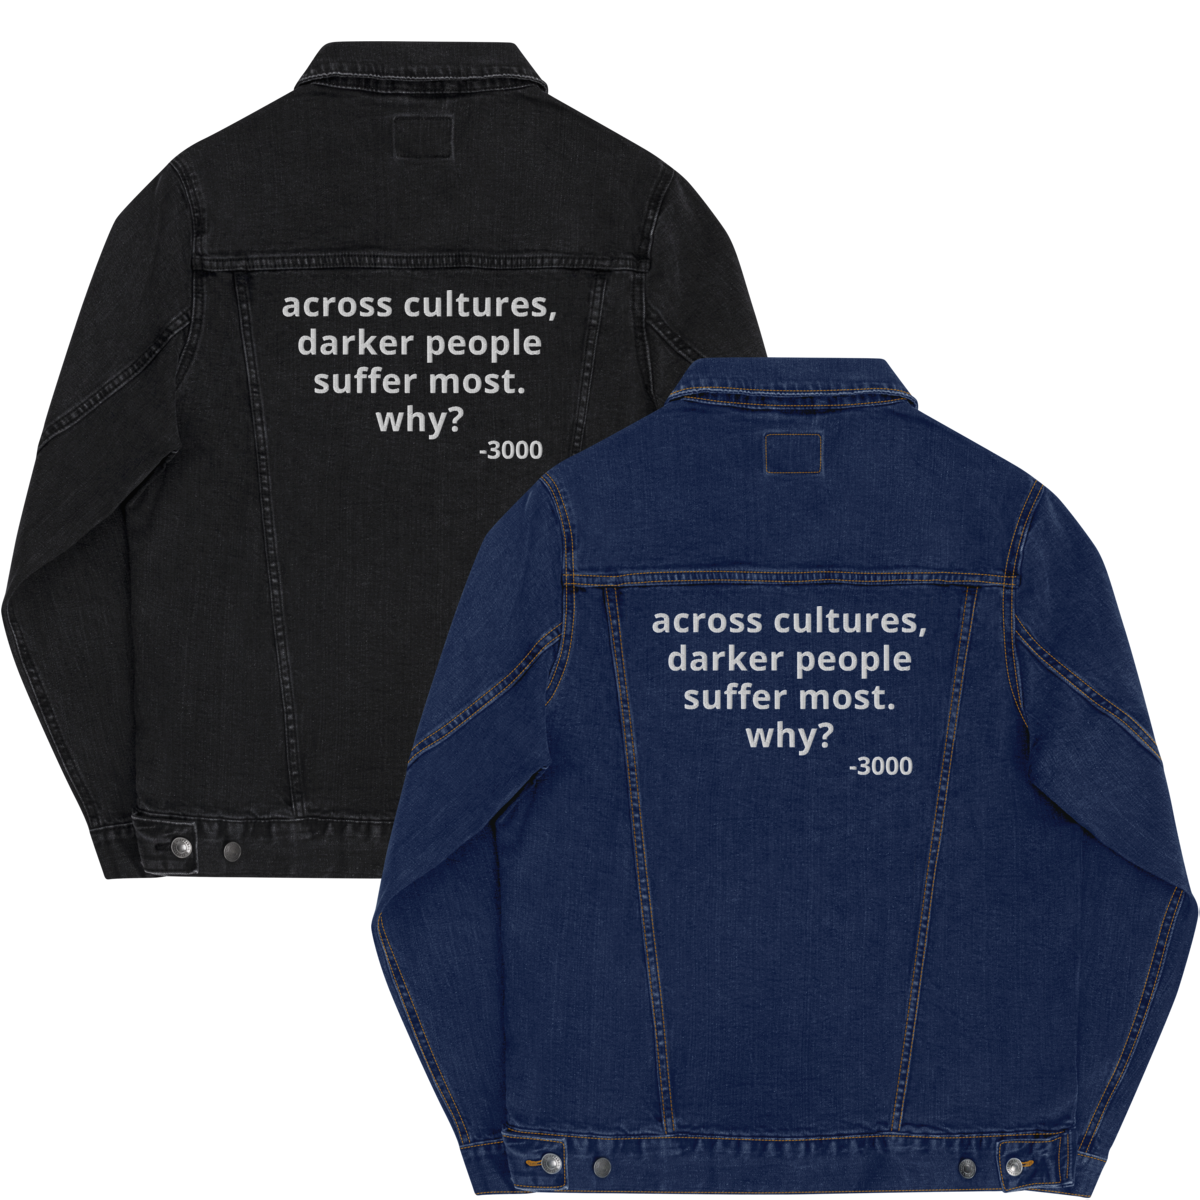 Across Cultures Darker People Suffer Most Why? Denim jacket